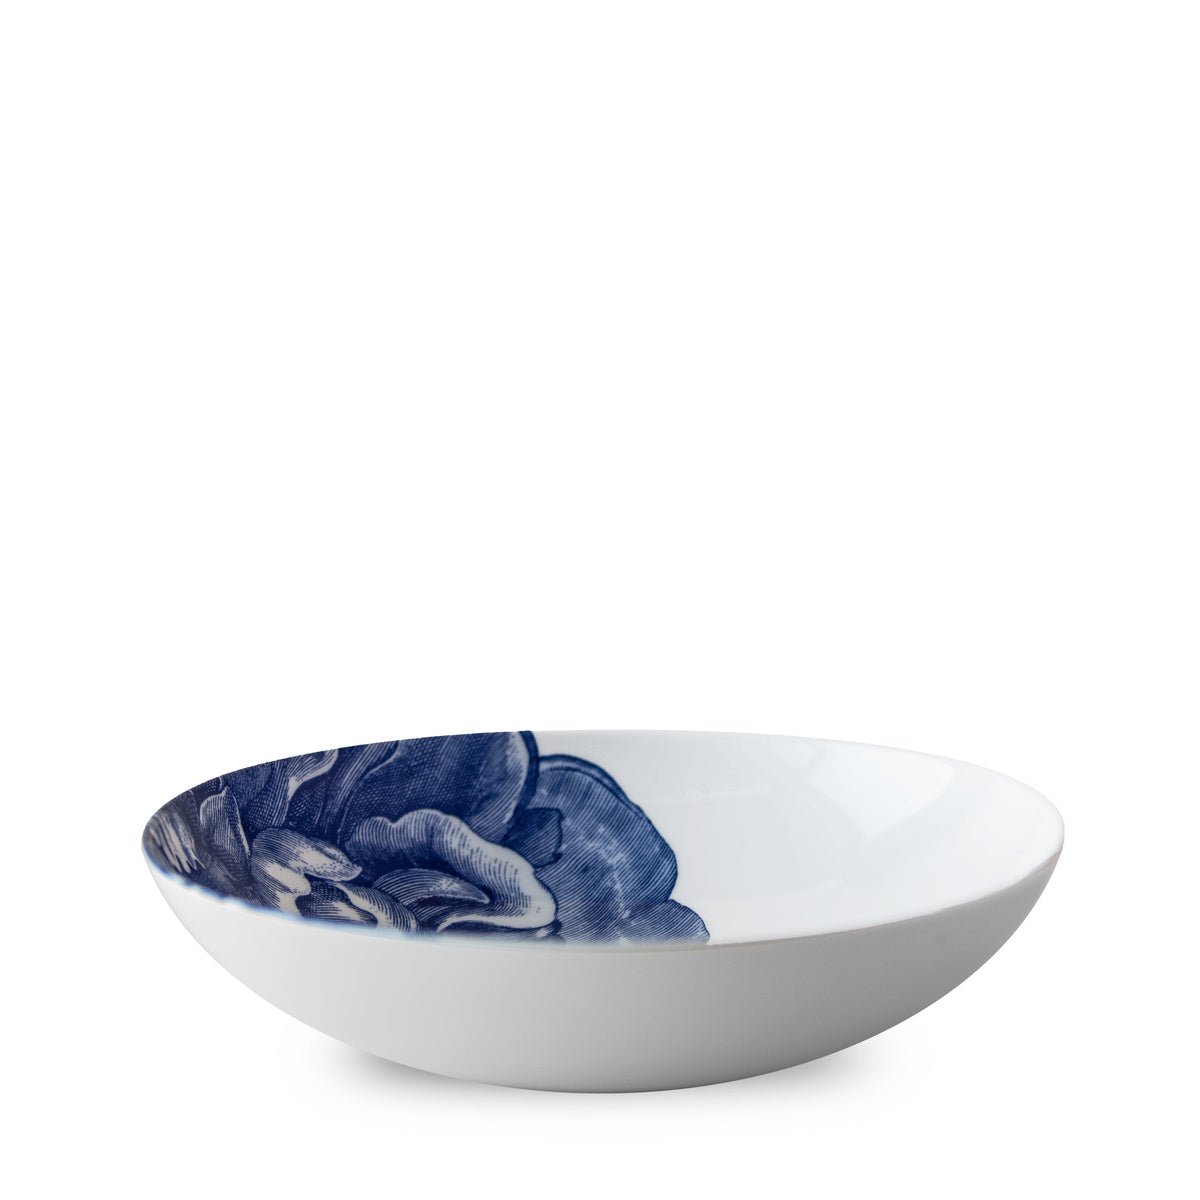 Premium Peony Coupe Soup Bowl with a blue floral pattern on the interior, isolated on a white background by Caskata Artisanal Home.